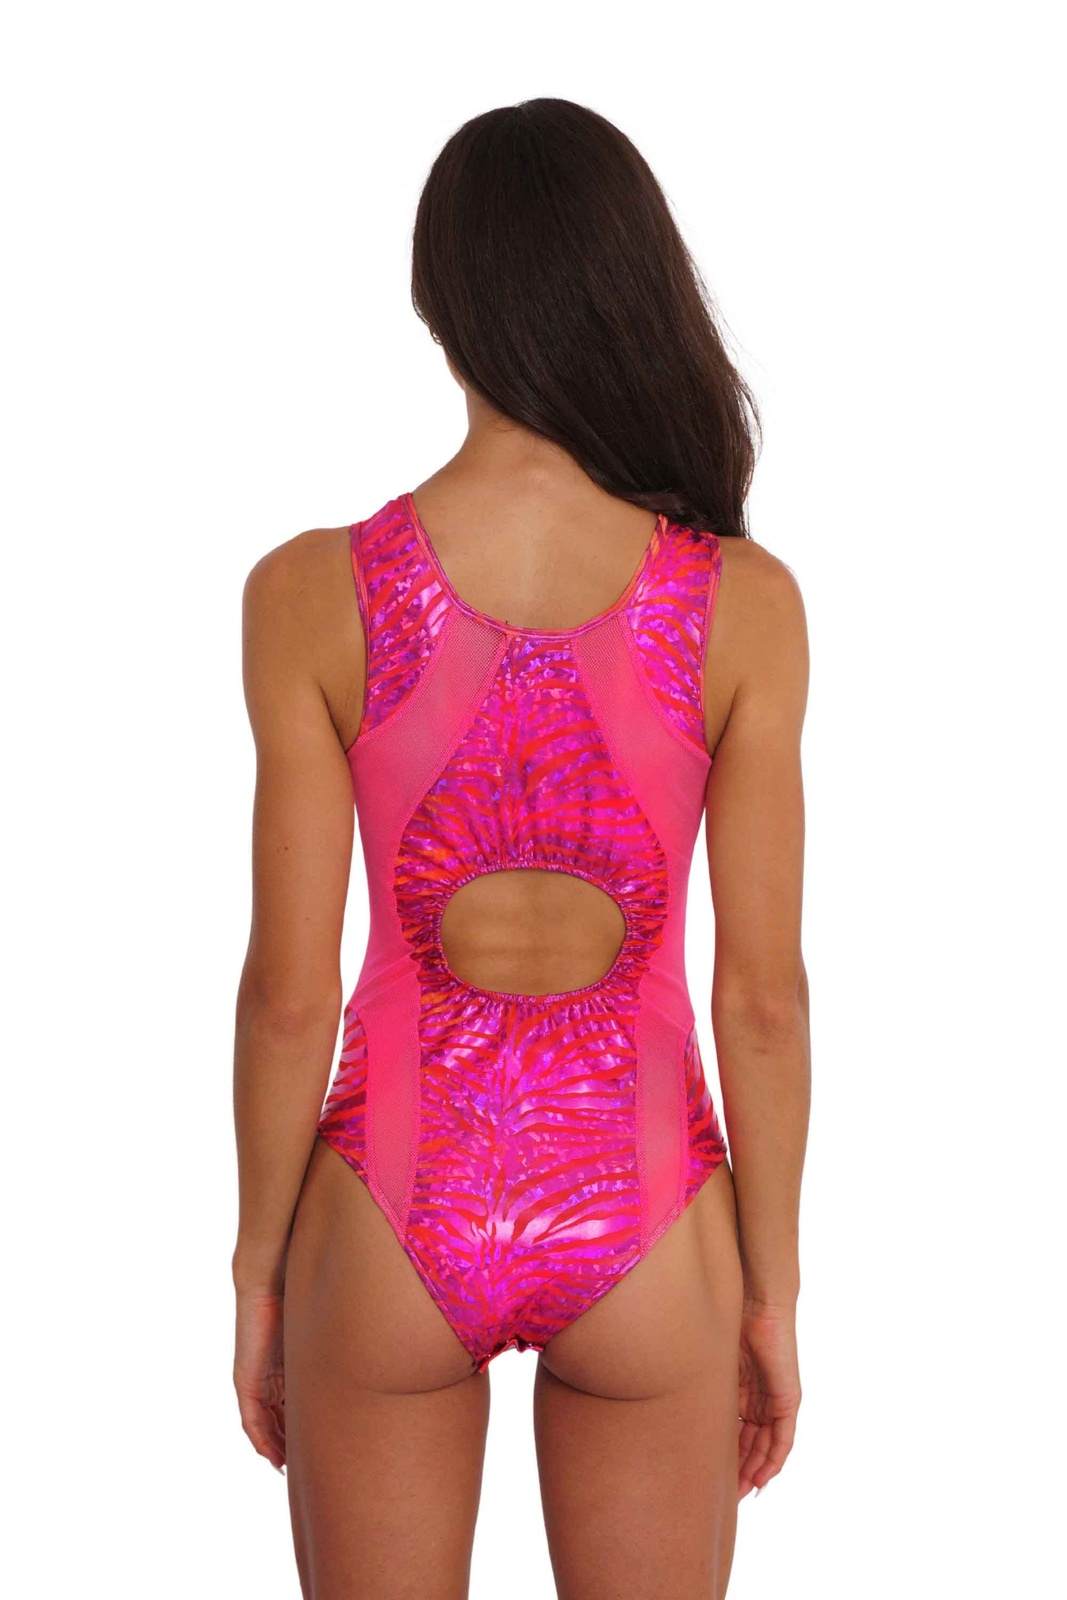 Gemini pink rave bodysuit with mesh panels from Love Khaos